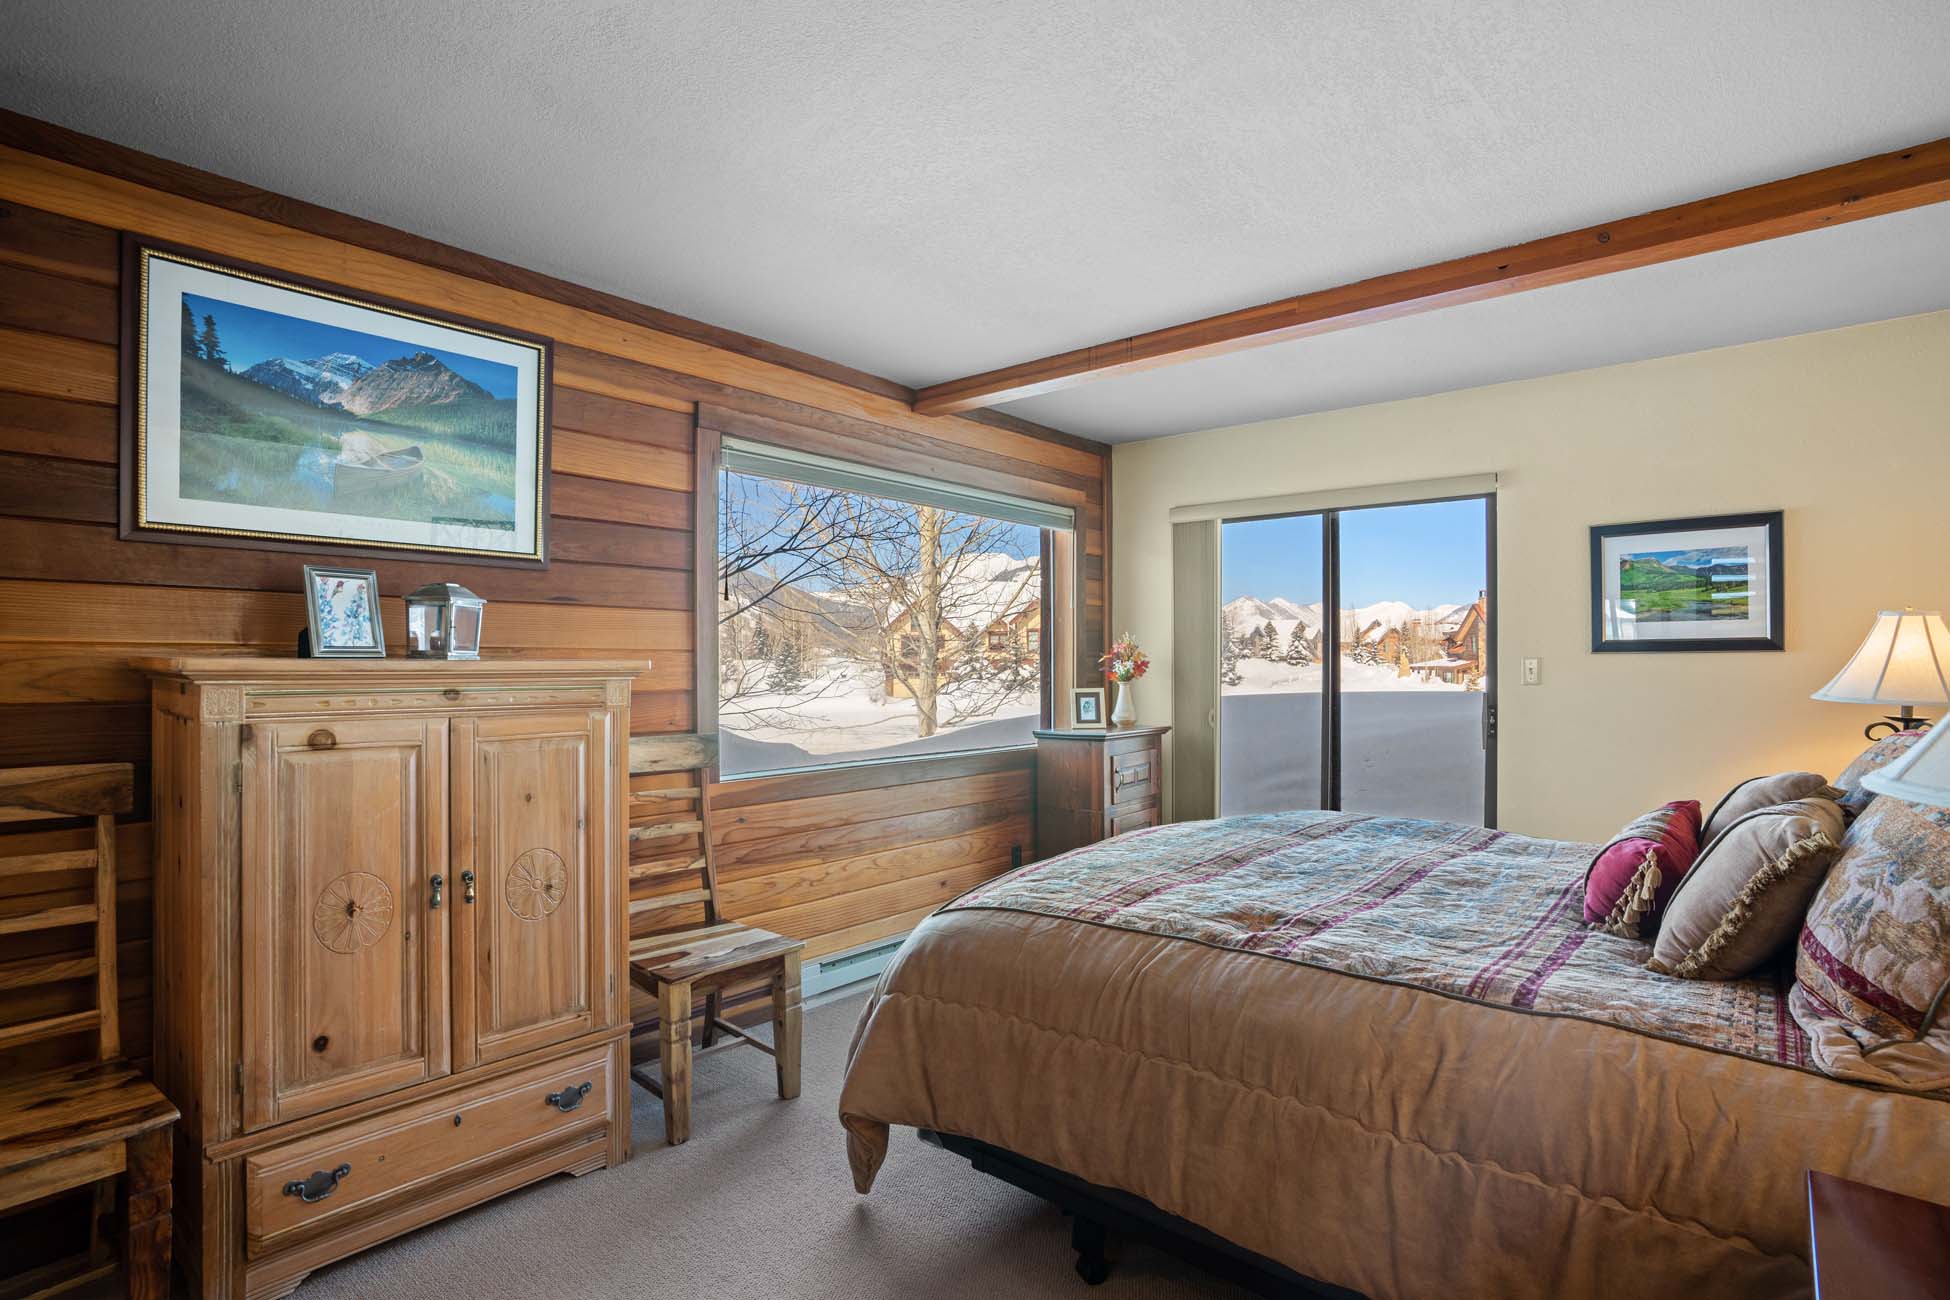 49 Powderview Drive, Crested Butte Colorado -bedroom